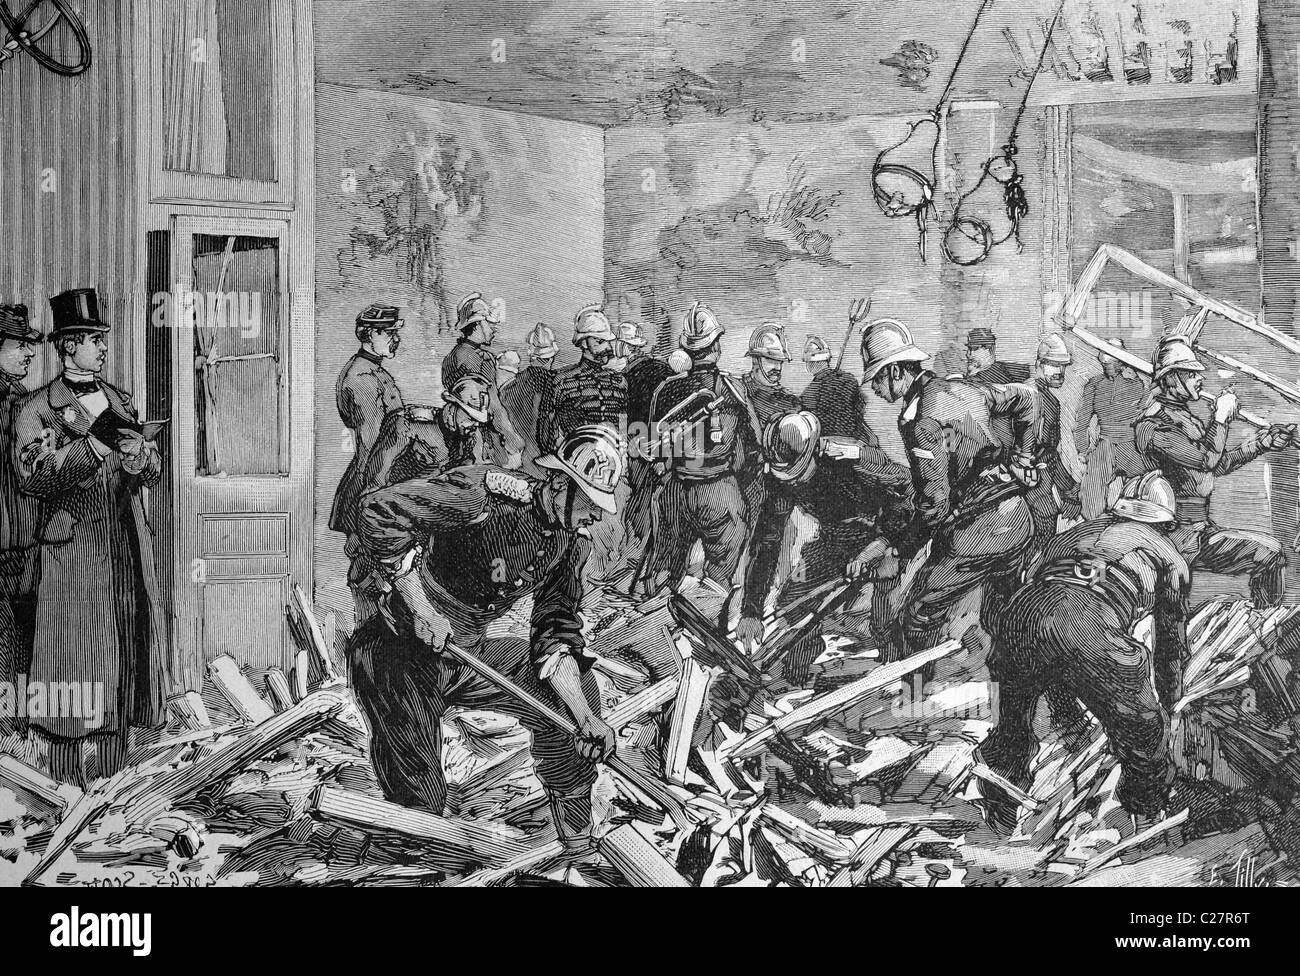 Police commissioners following a dynamite explosion in Paris, France, historical illustration, ca. 1893 Stock Photo